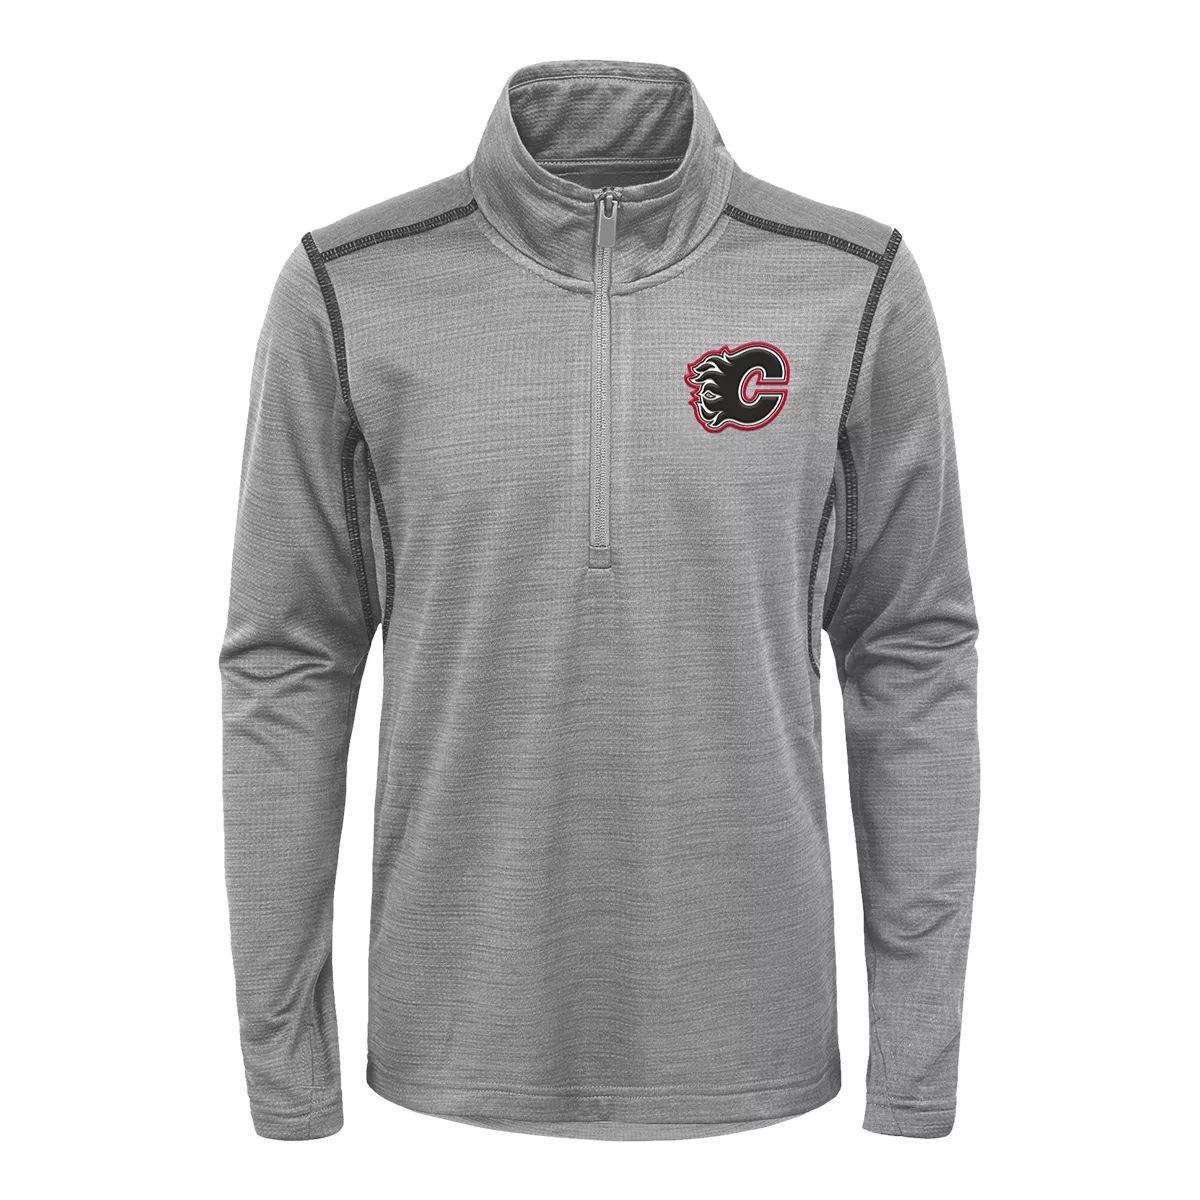 Youth Calgary Flames Back To The Arena 1/4 Zip Top | SportChek